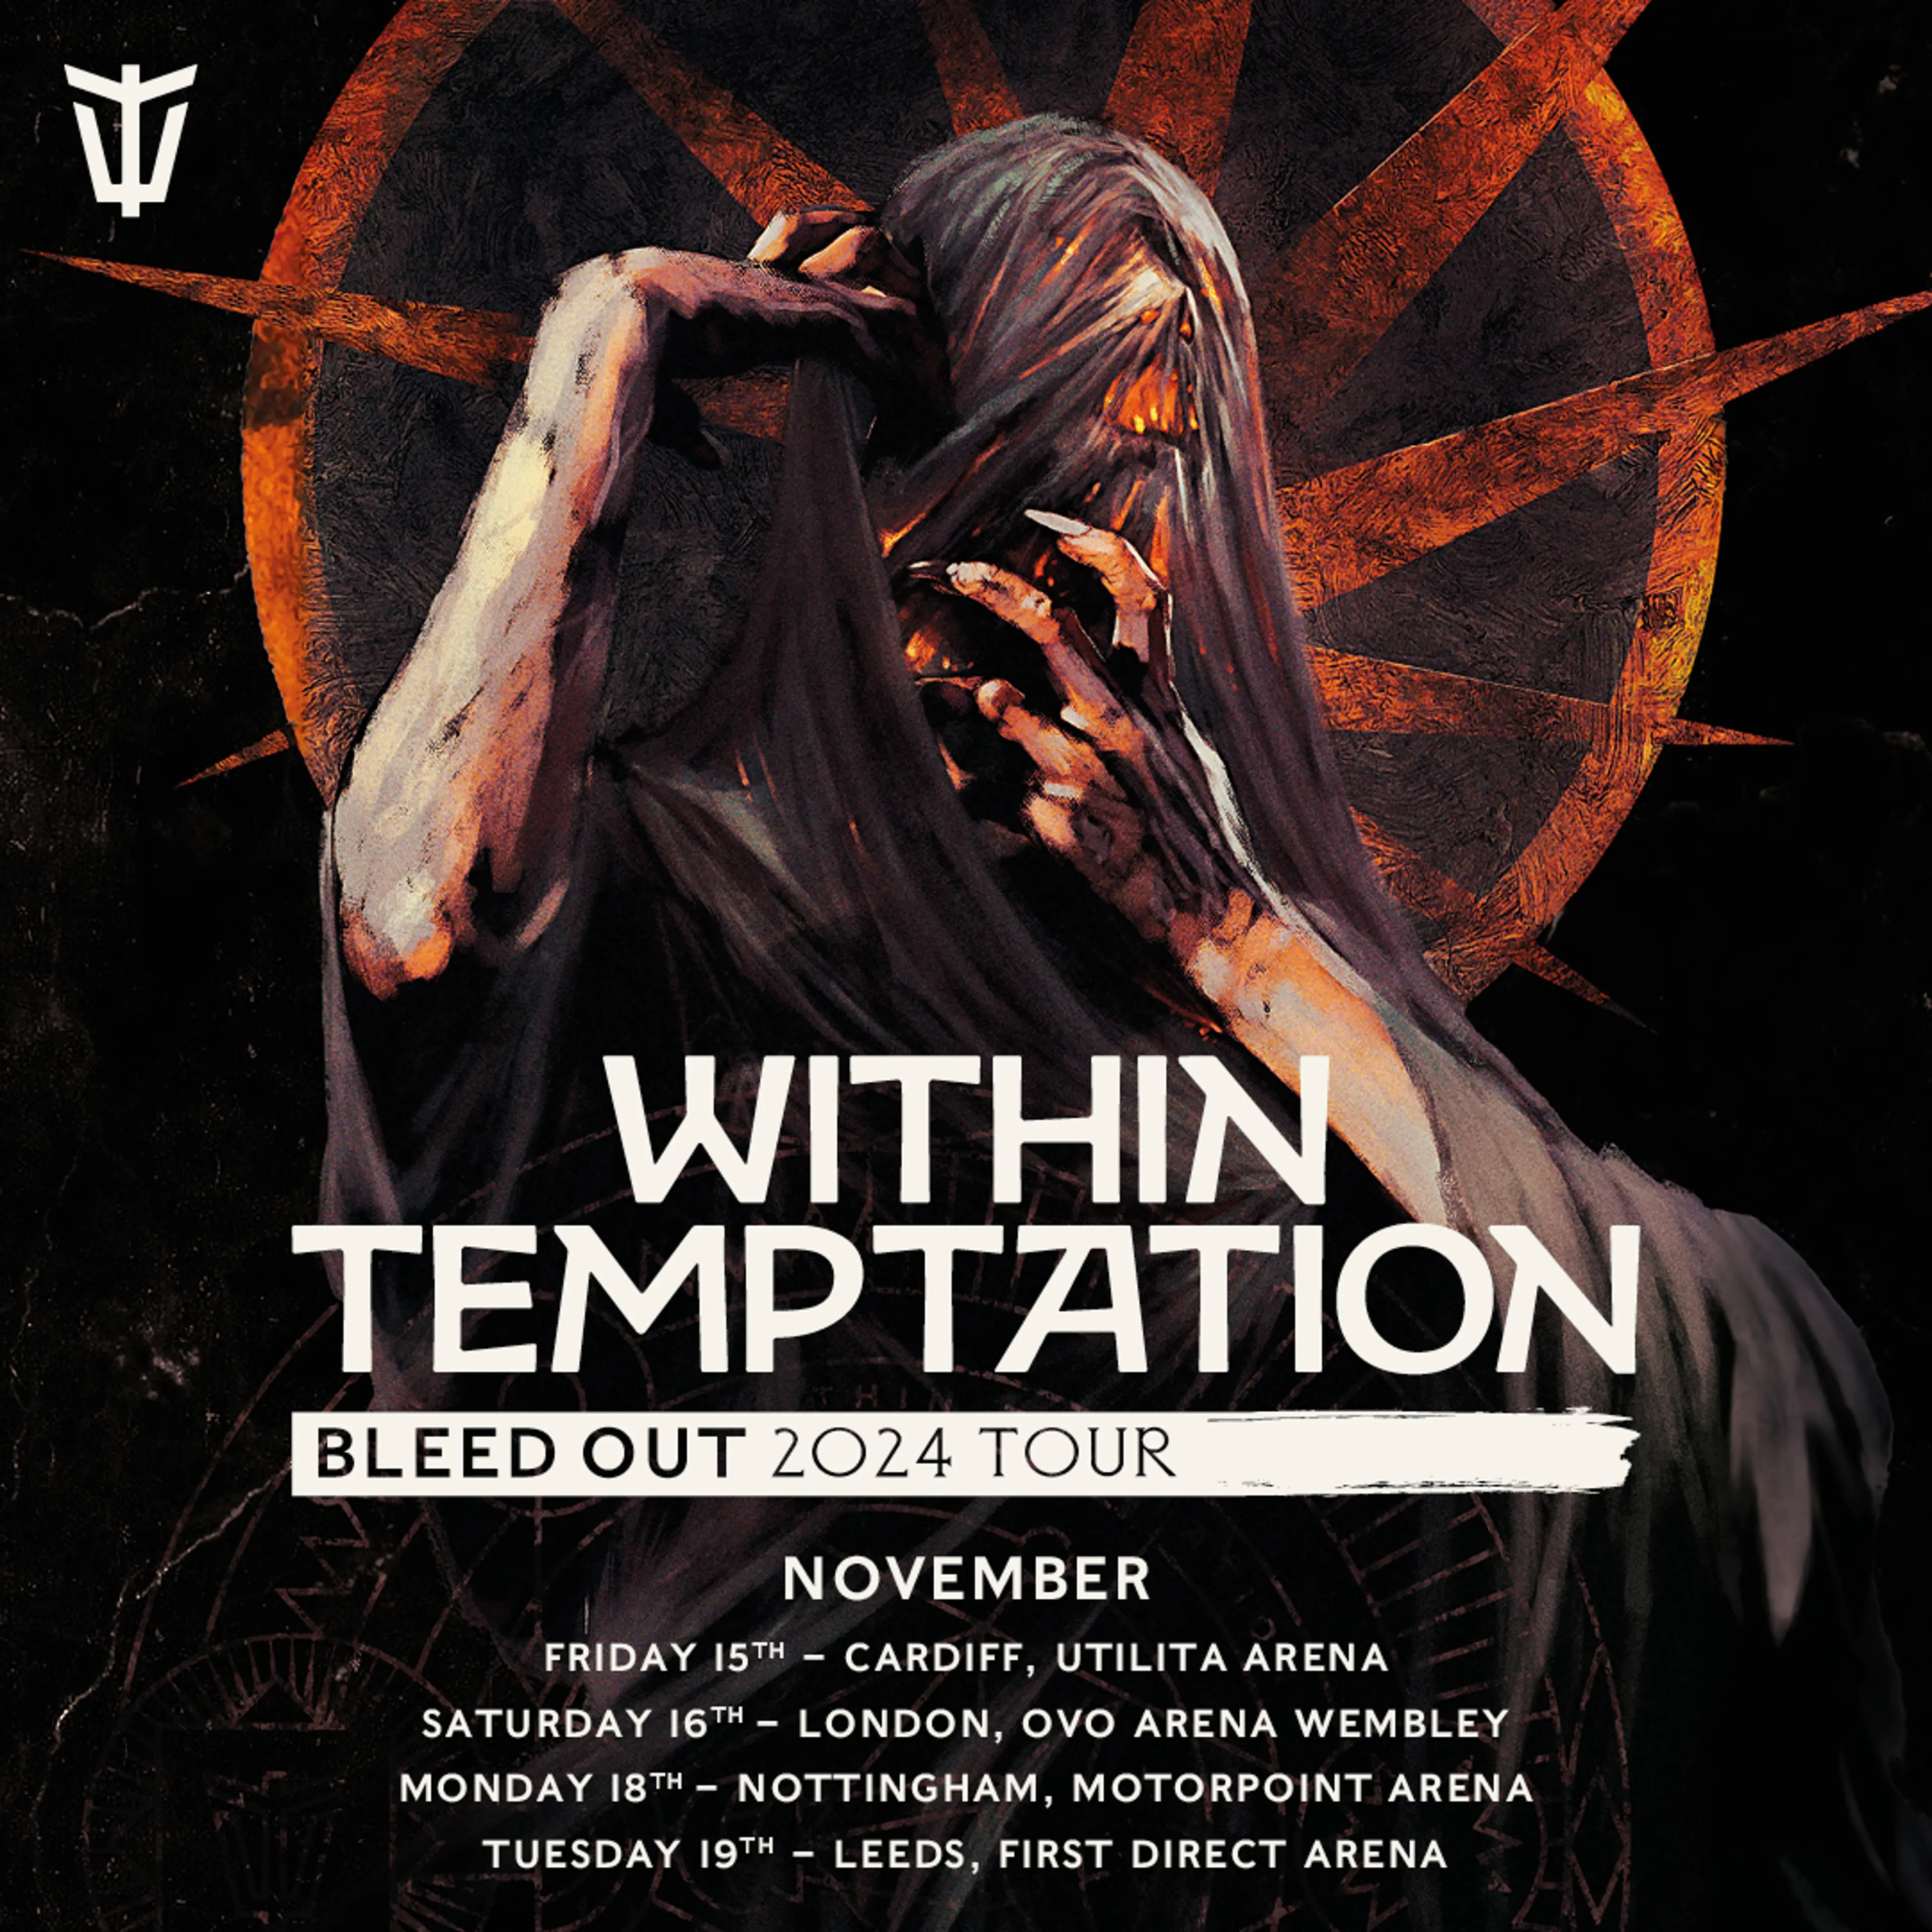 Within Temptation: Bleed Out 2024 Tour